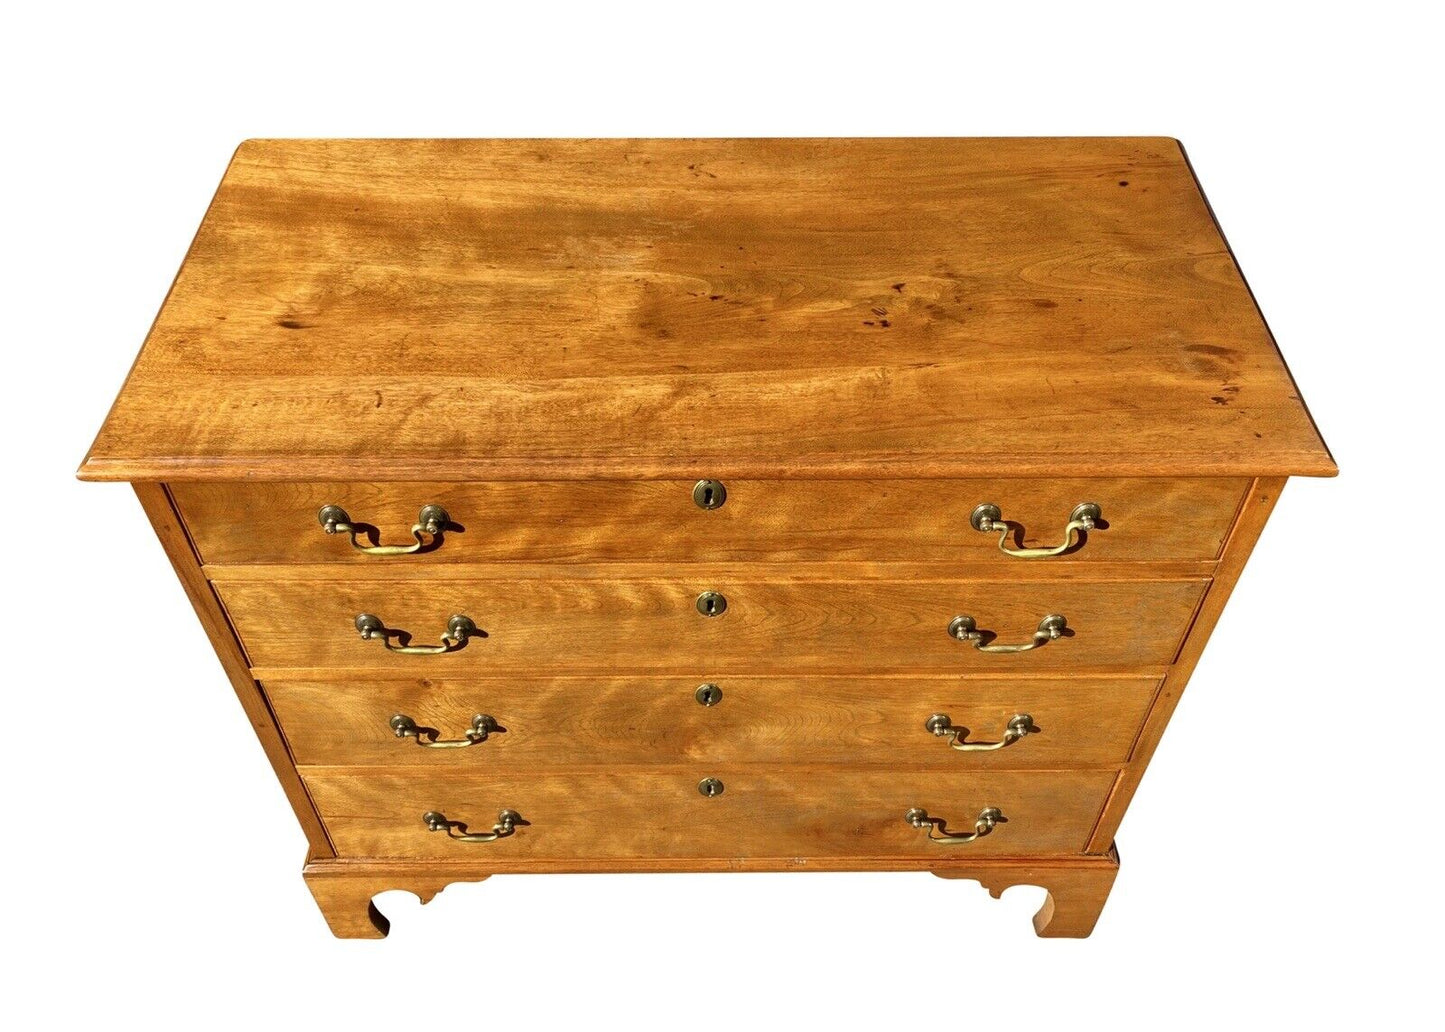 18th C Antique New Hampshire Chippendale Flame Birch Chest of Drawers / Dresser